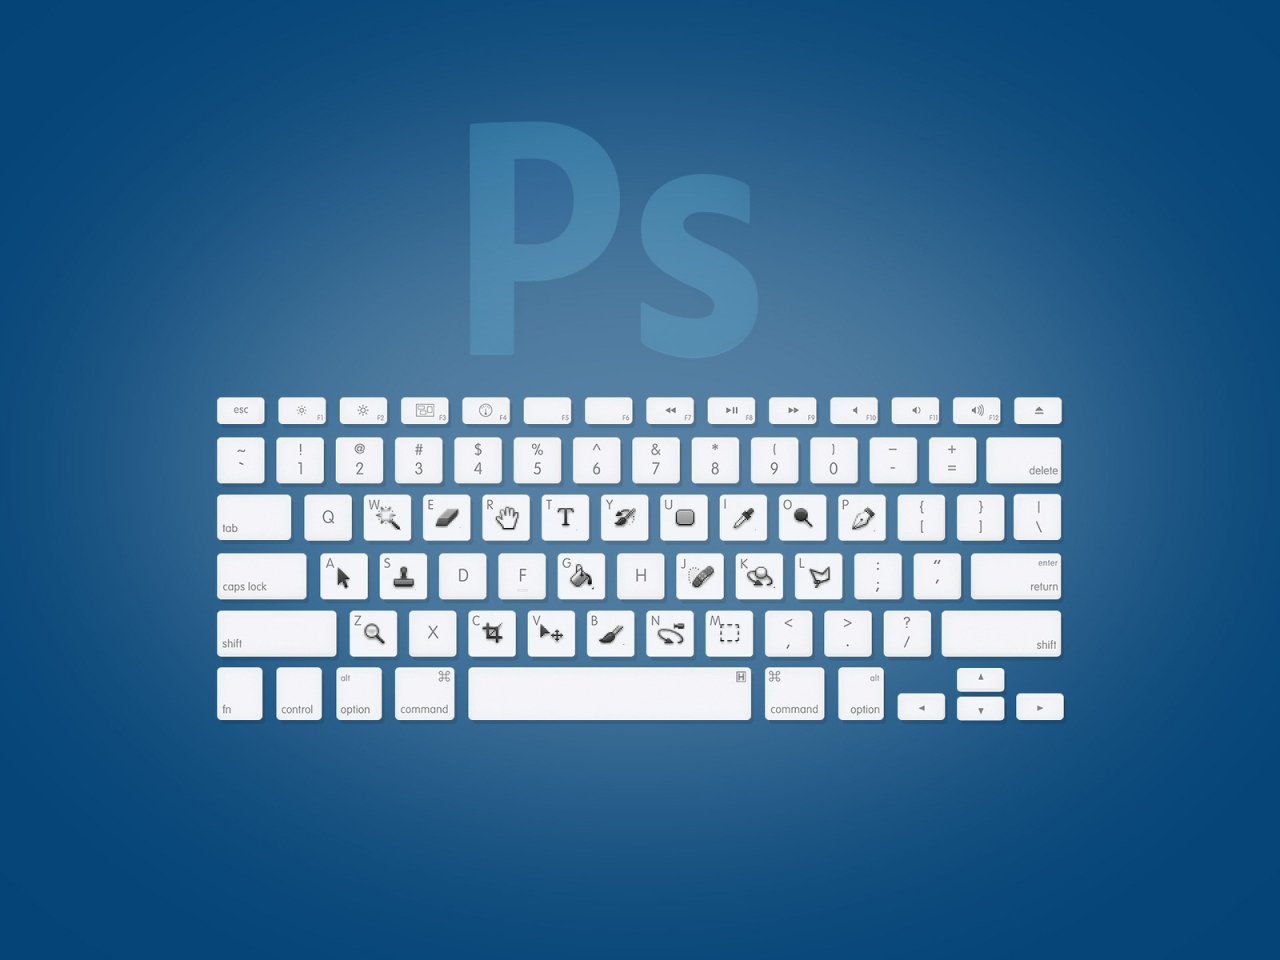 Photoshop Keyboard for 1280 x 960 resolution